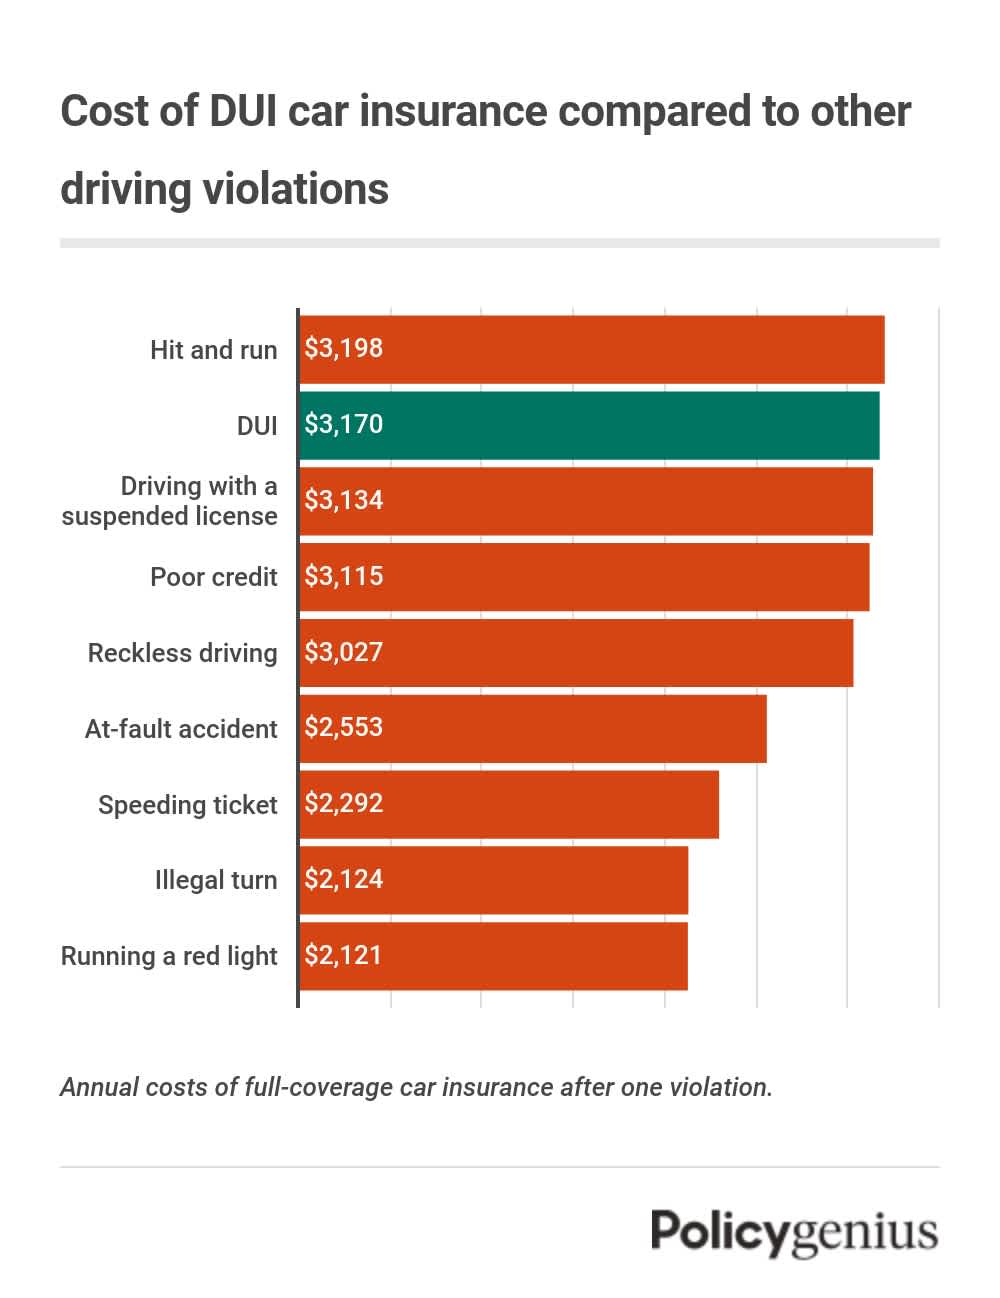 Cost of car insurance violation compared to DUI - table